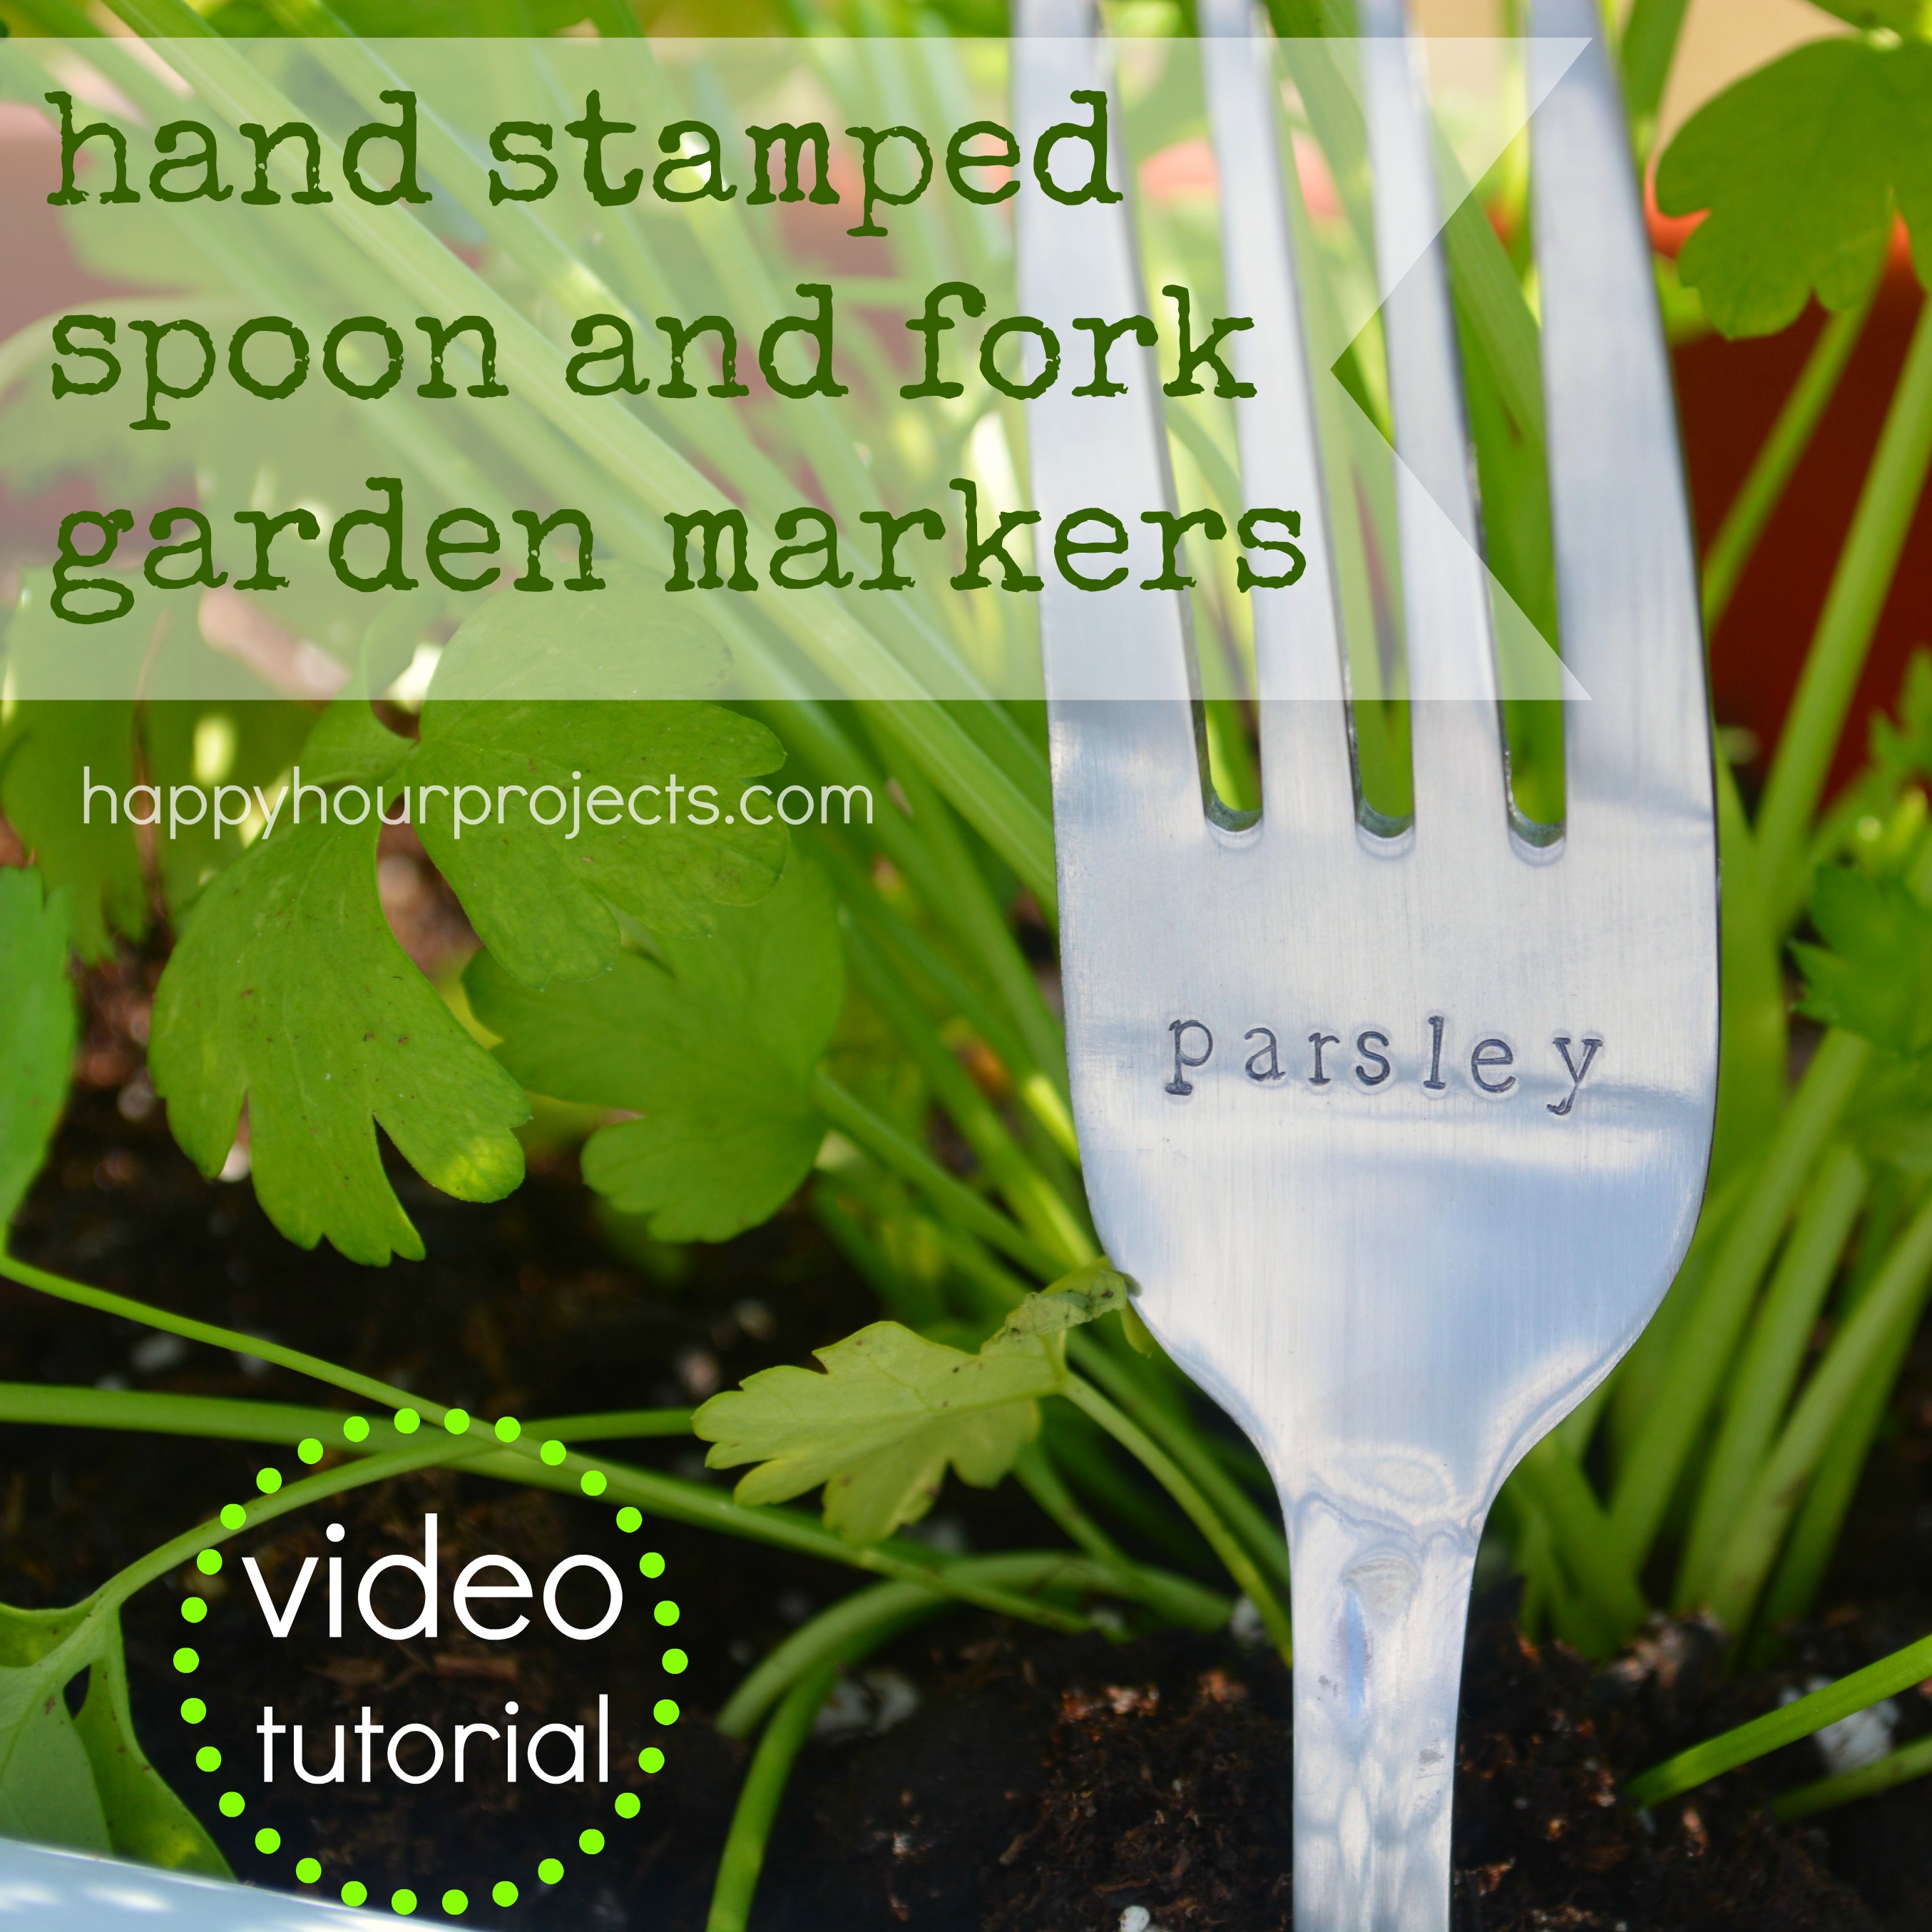 Hand Stamped Spoon and Fork Garden Markers - Video Tutorial at www.happyhourprojects.com